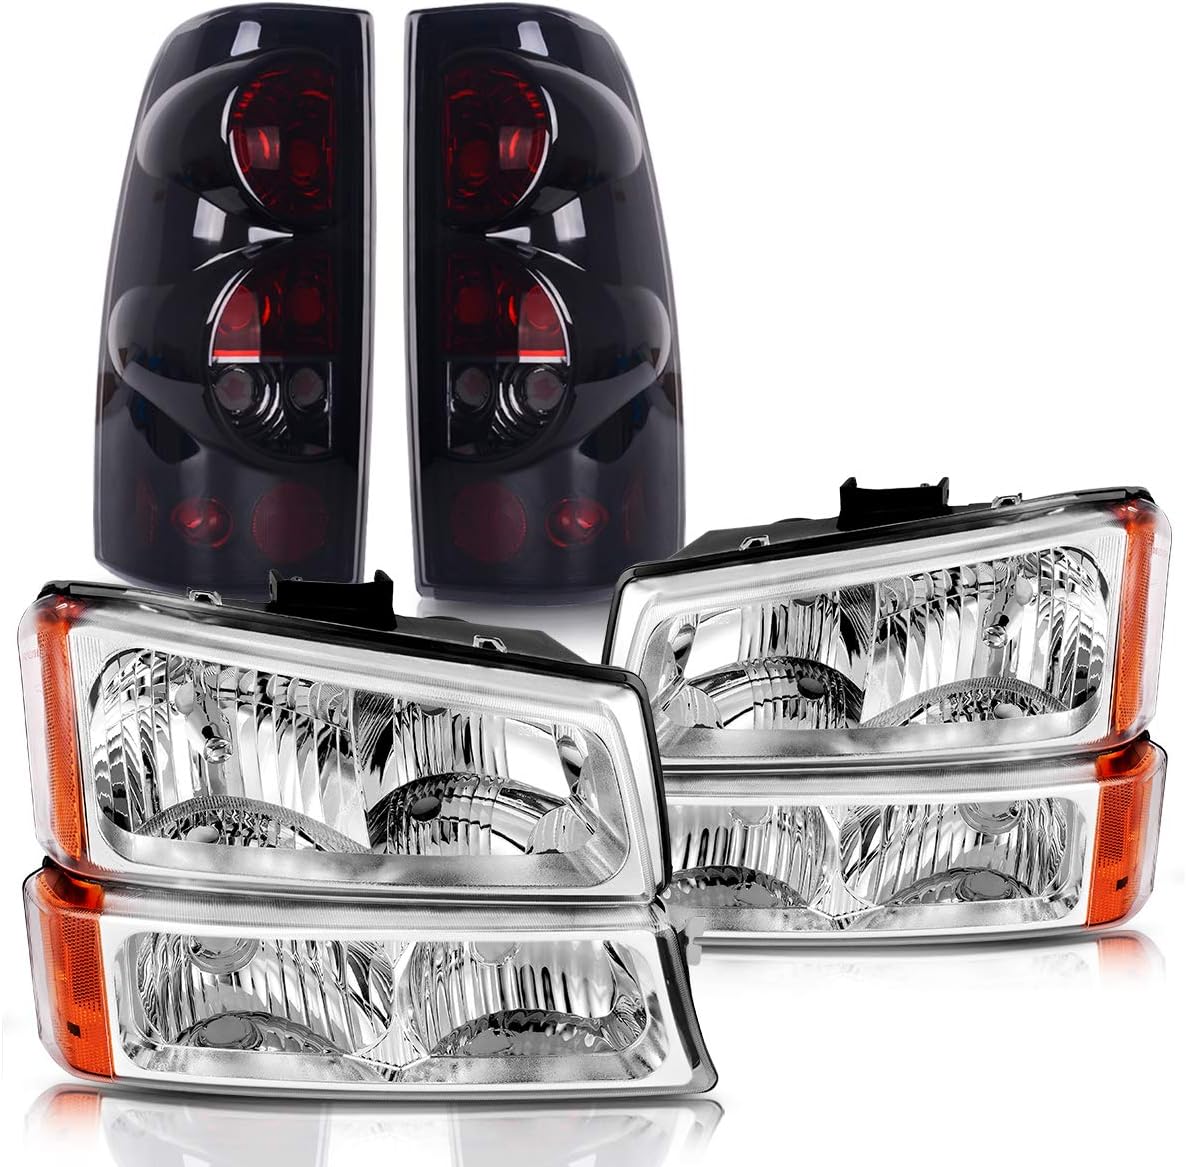 DWVO Headlight Assembly and Tail Lights Combo Set Compatible with 03-06 Chevrolet Silverado 1500/2500HD 05-06 Chevry Silverado 1500 HD 03-04 Chevrolet Silverado 2500 04-06 Chevrolet Silverado 3500